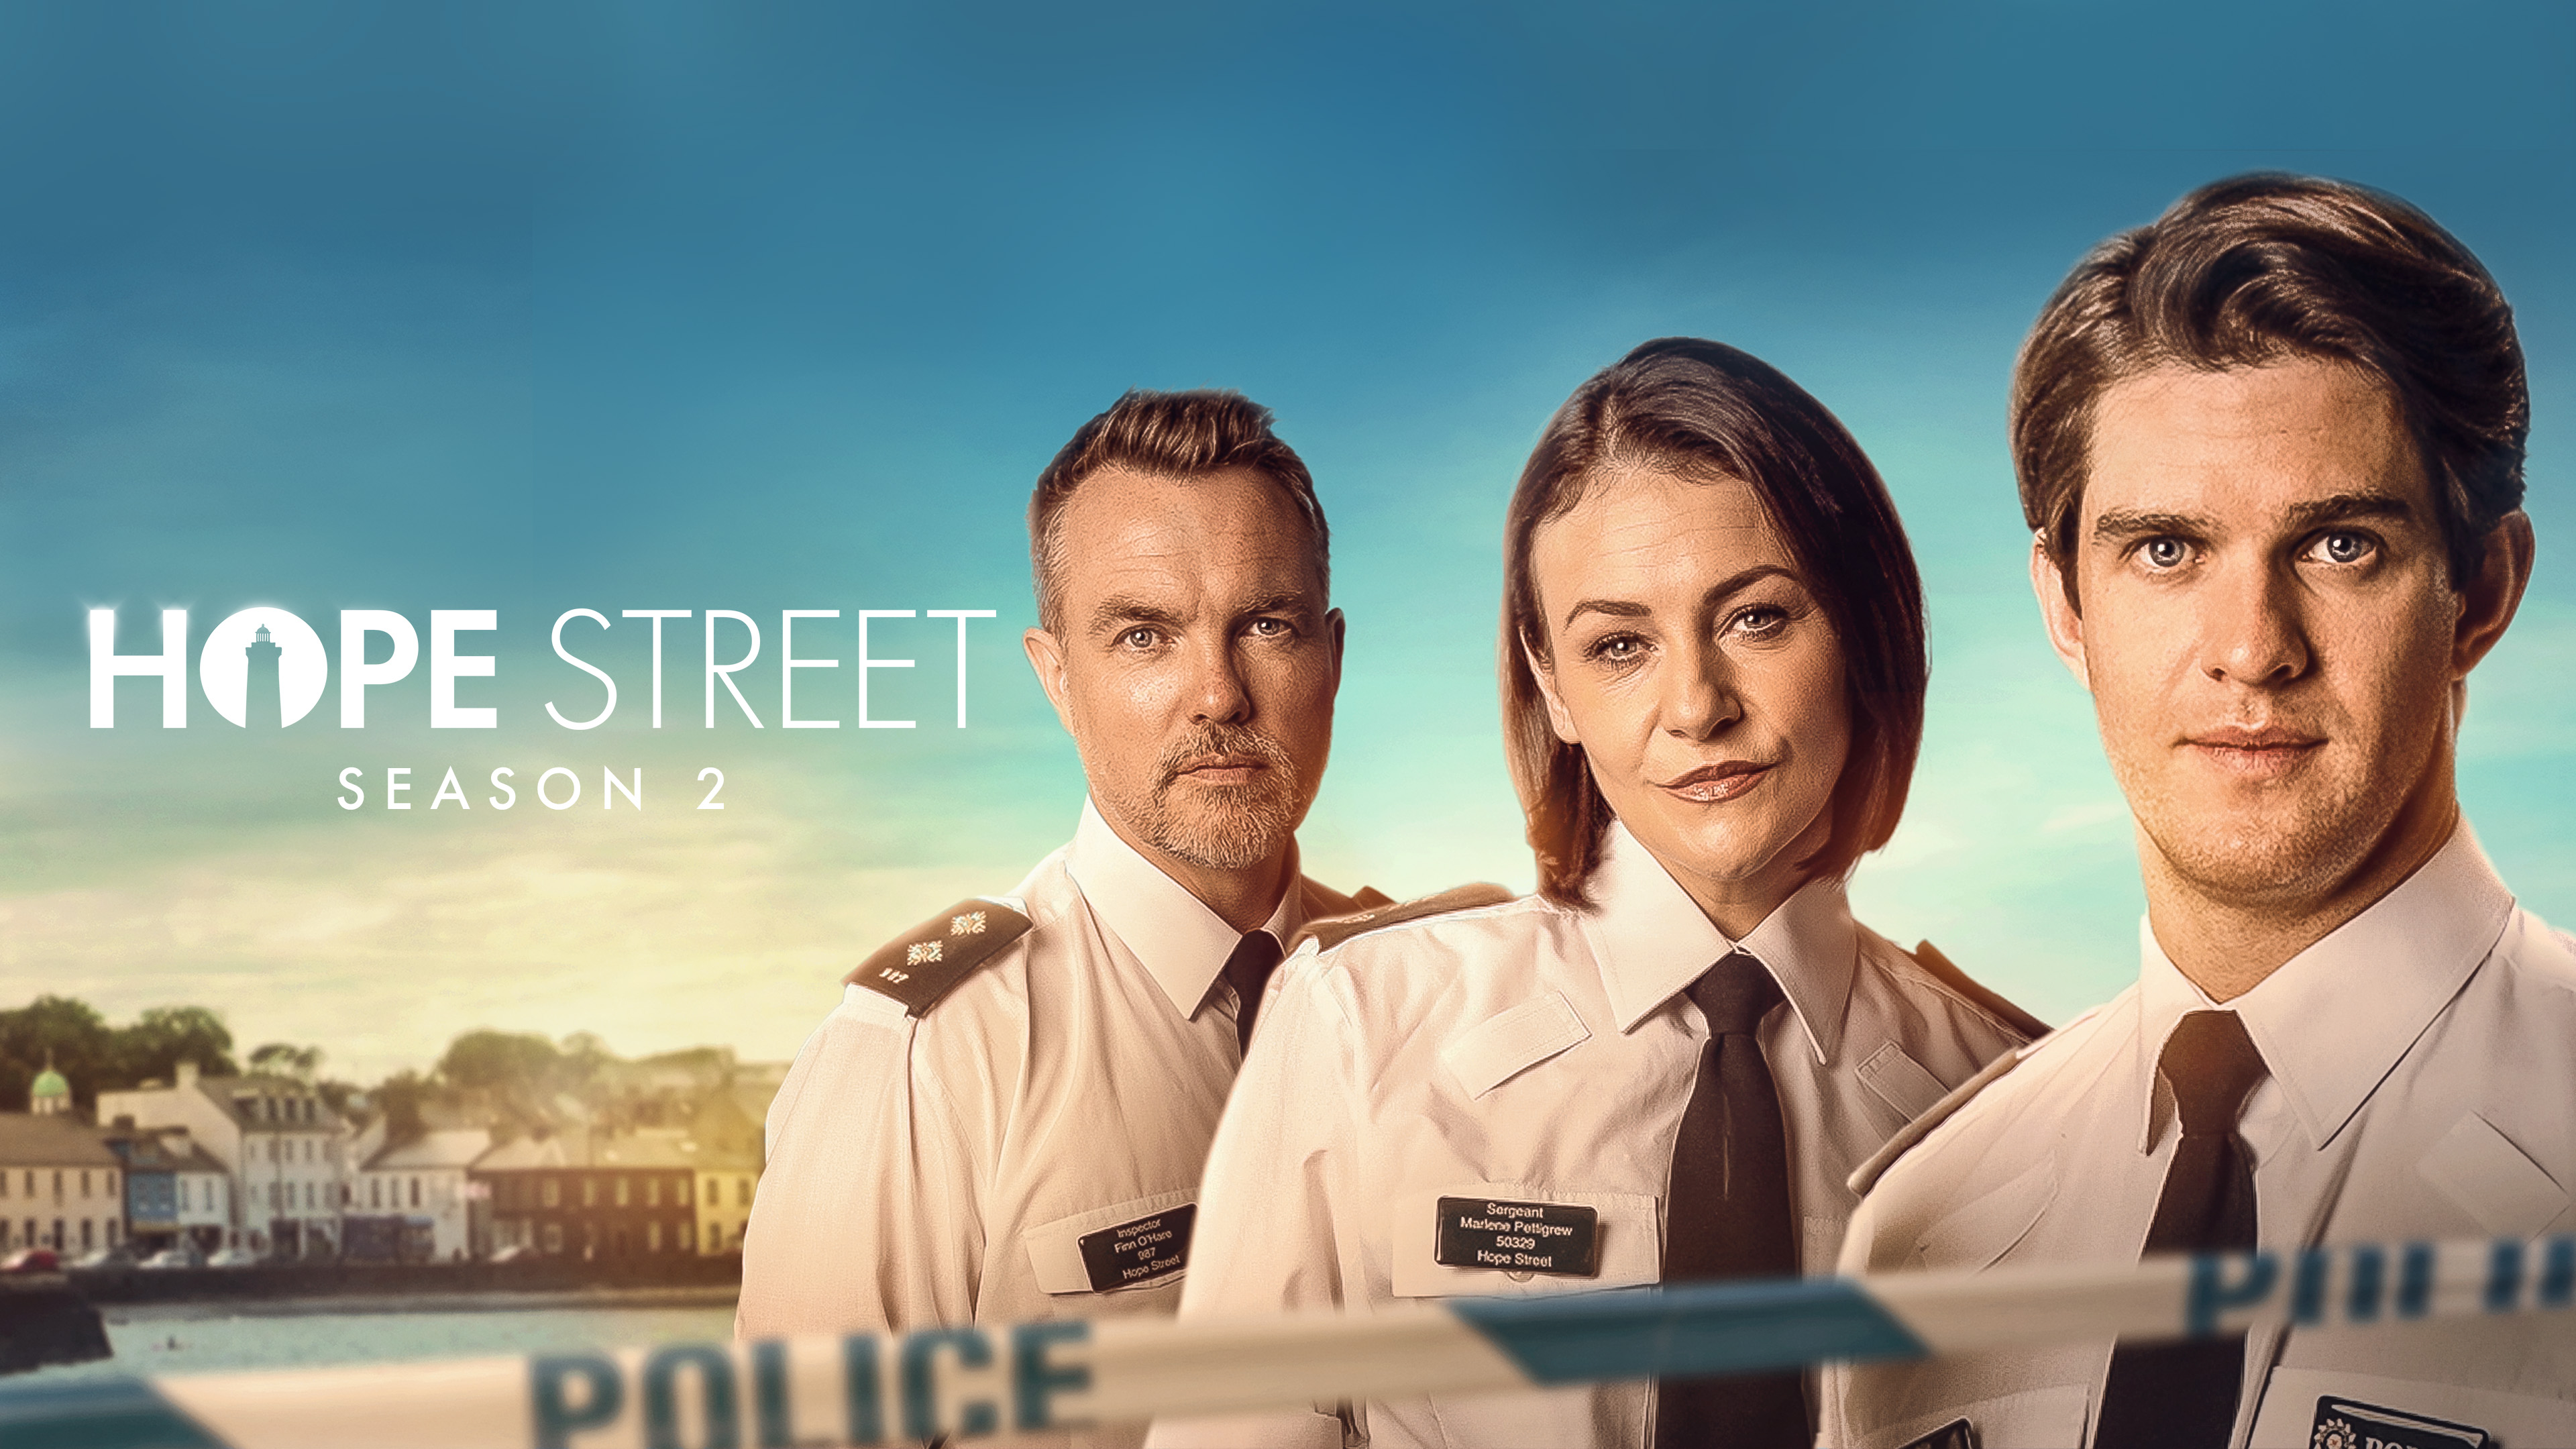 HOPE STREET Season 2 picks up six months after the car crash at the end of the first season.